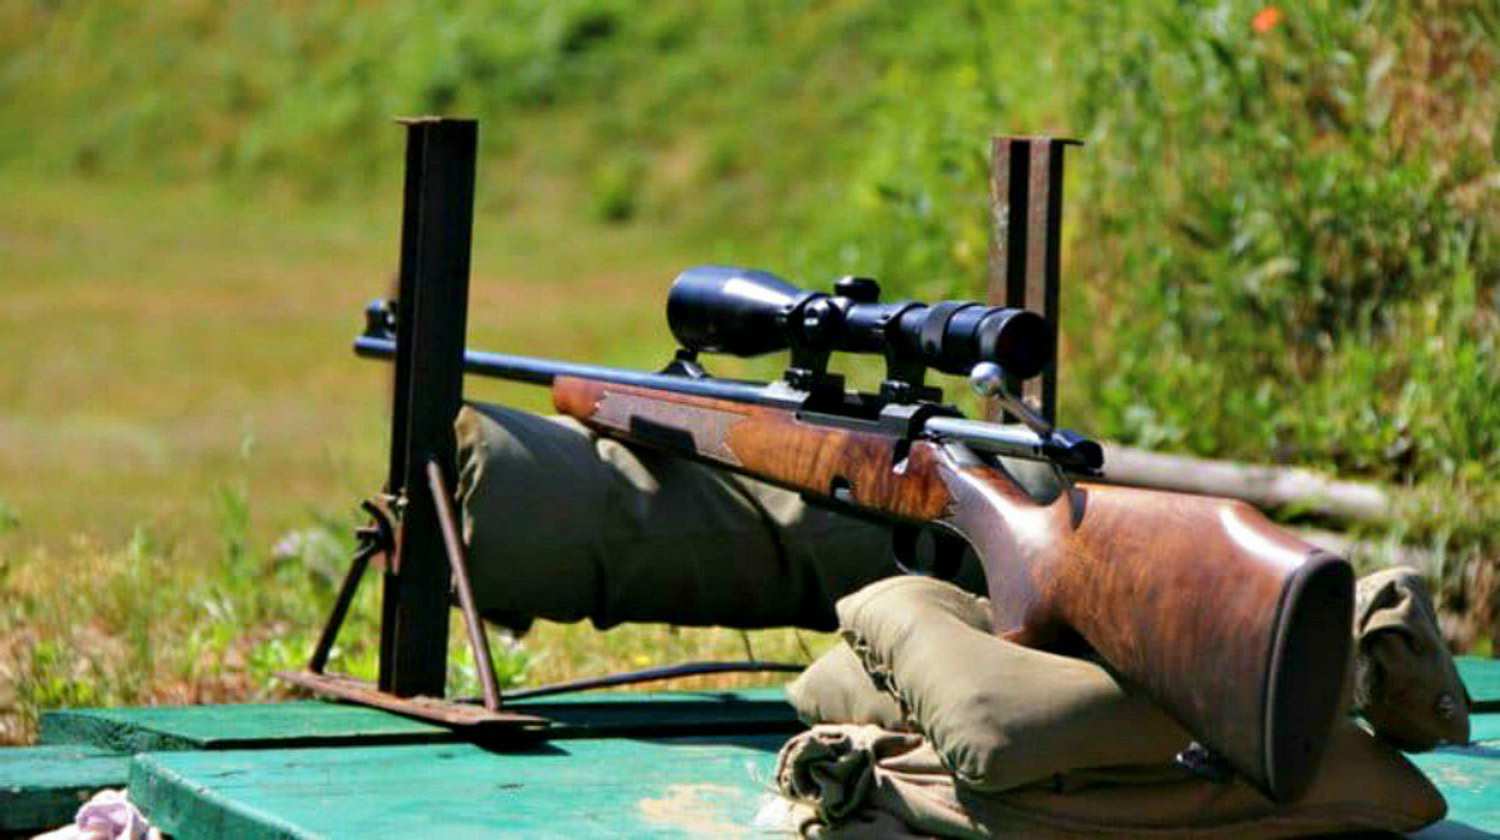 Feature | Hunting Rifle | Long Range Shooting Tips For Beginners